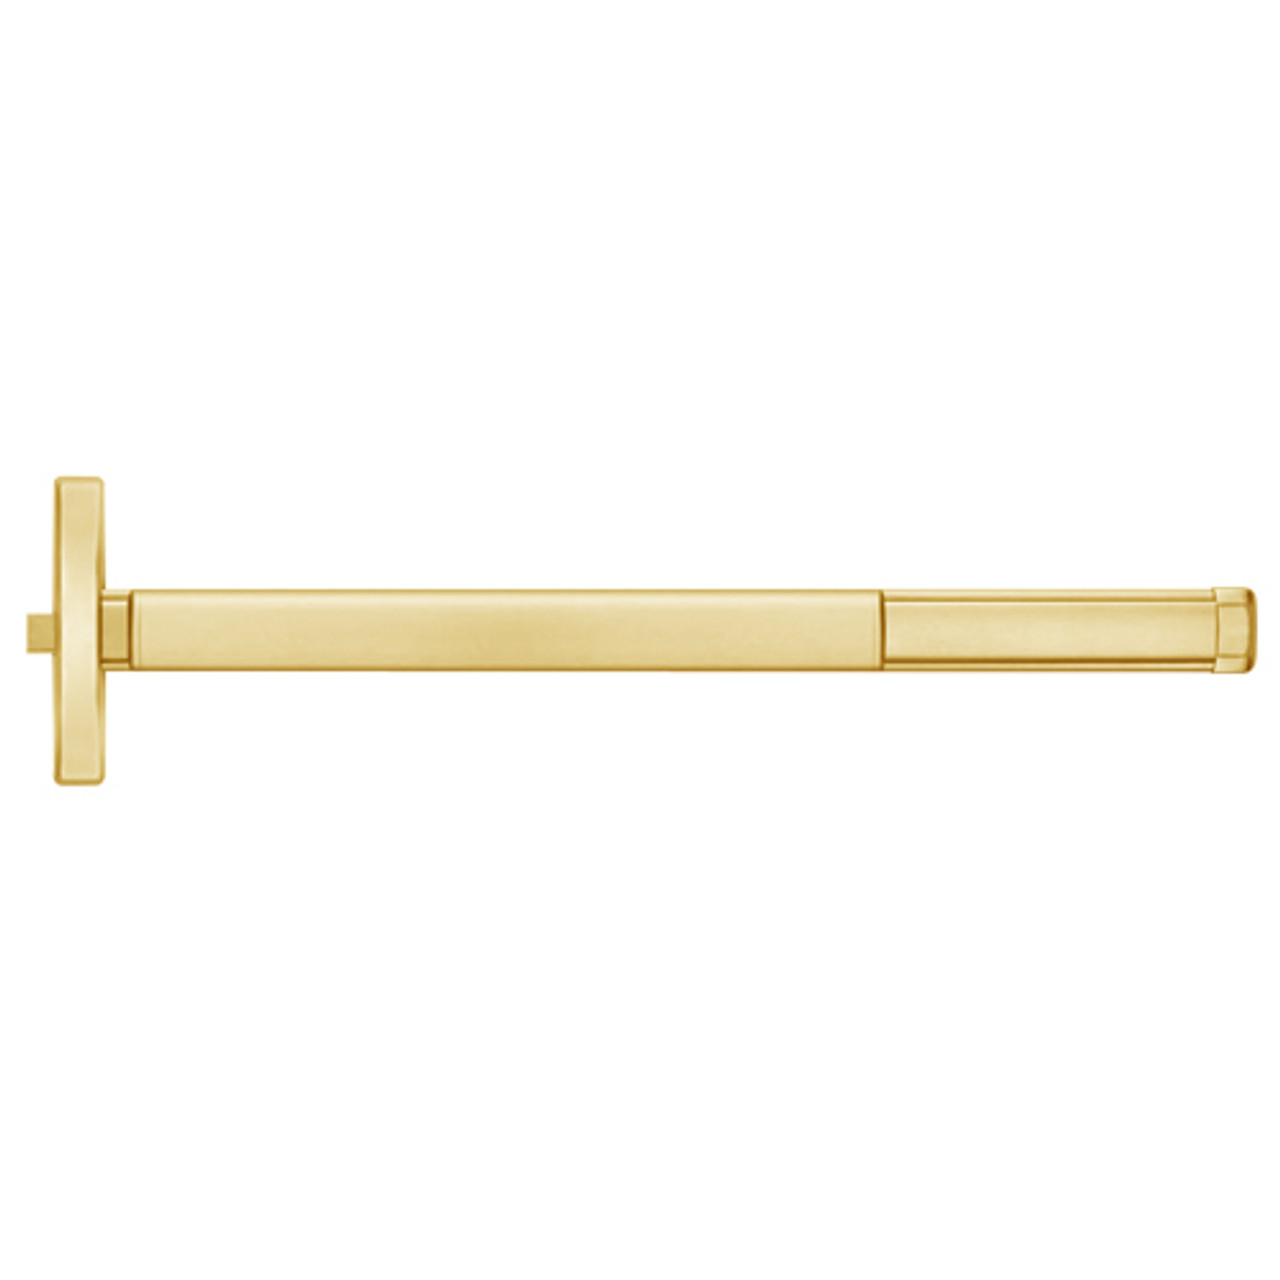 ELRFL2402-605-36 PHI 2400 Series Fire Rated Apex Rim Exit Device with Electric Latch Retraction Prepped for Dummy Trim in Bright Brass Finish